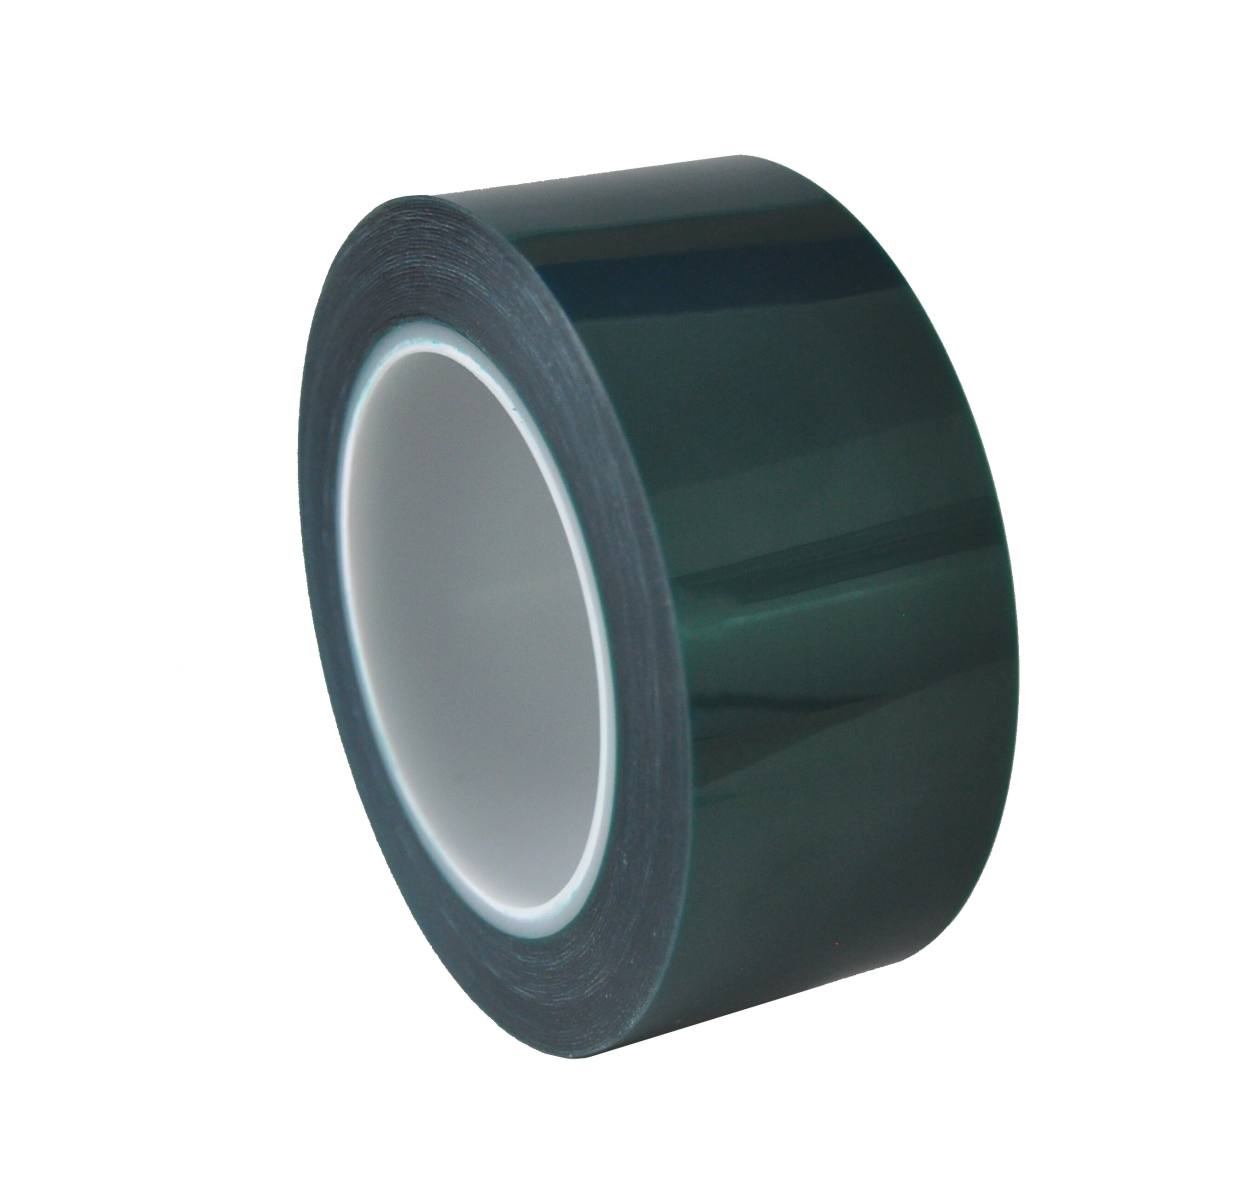 S-K-S 208G polyester adhesive tape, 150mmx66m, green